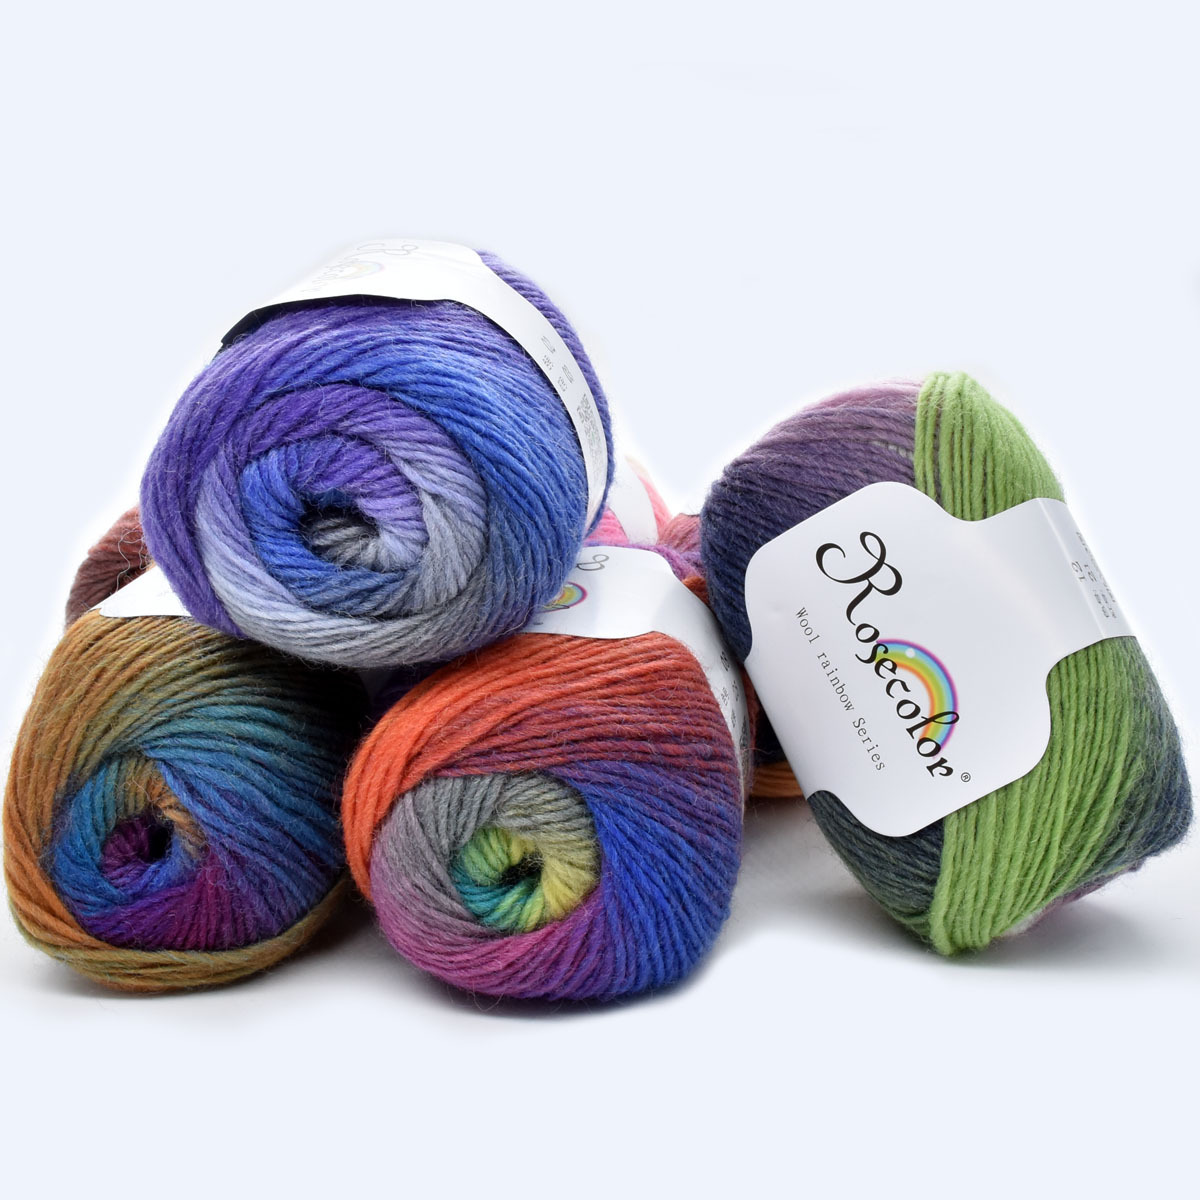 100g Wool Yarn for Knitting Rainbow Color Wool Yarn for Crocheting Soft  Warm Wool Yarn for Crocheting Projects, Sweater, Gloves, DIY Toys - 400  Meters